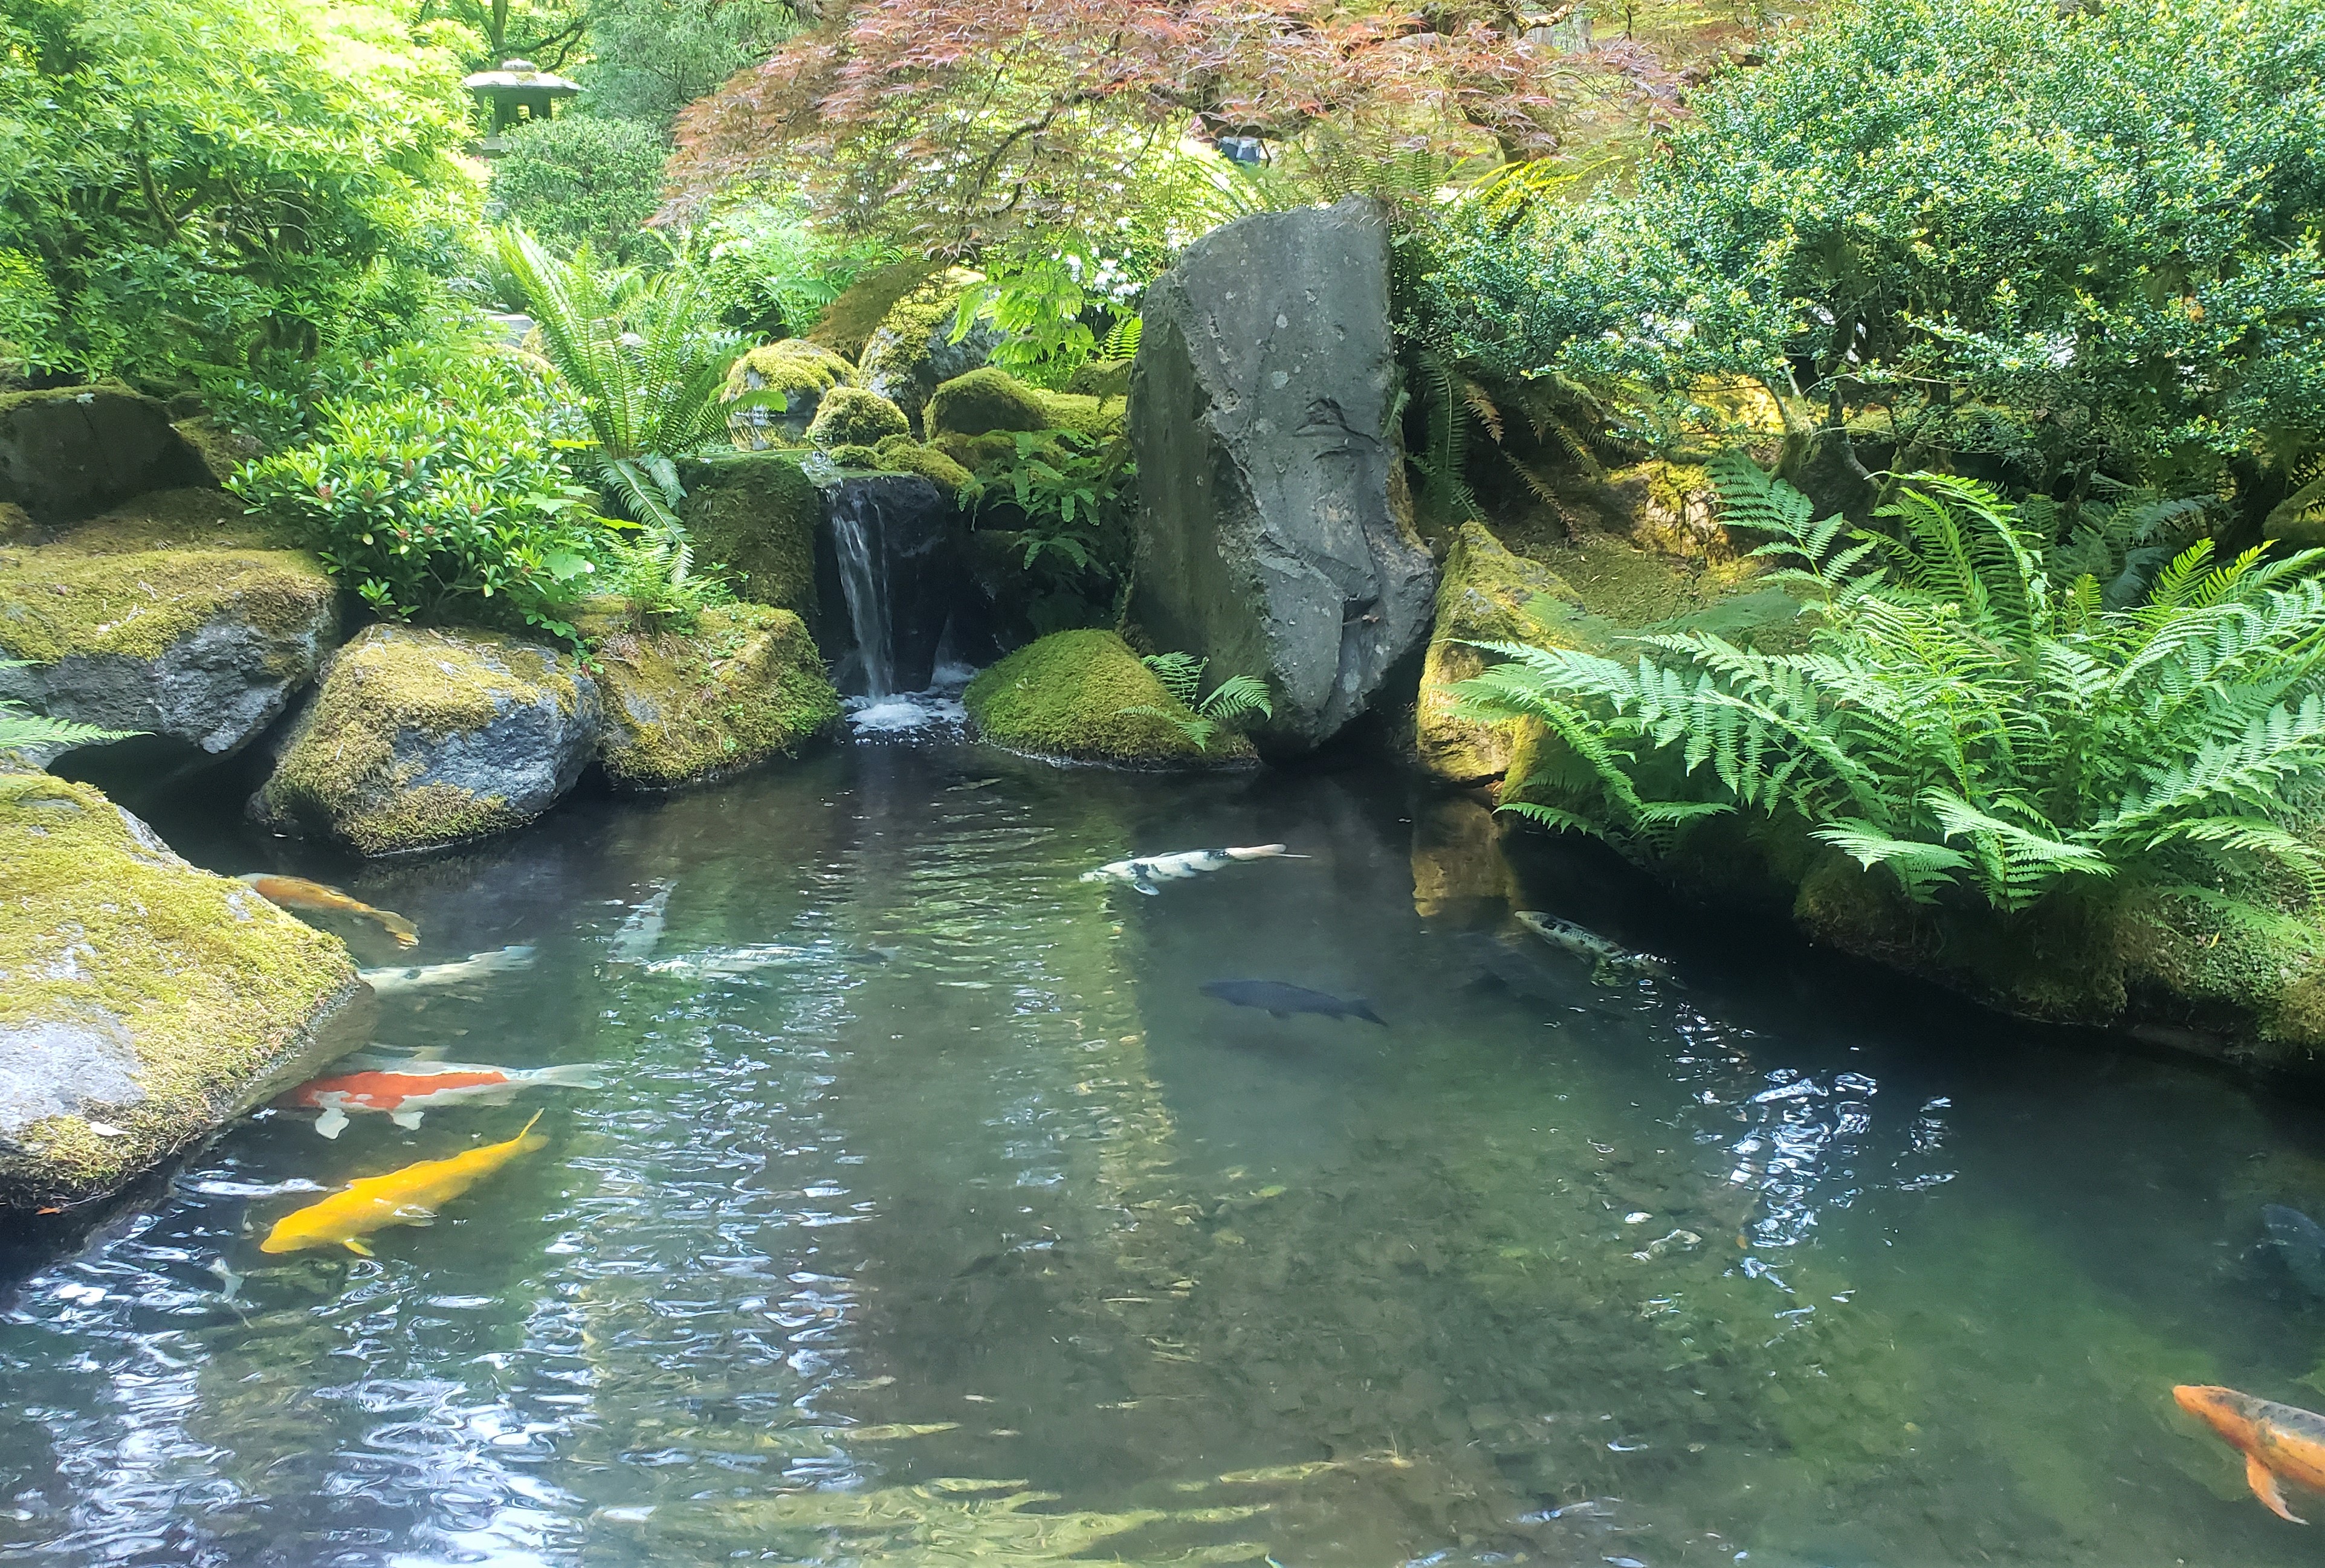 Koi fish in a pond at the Portland Japanese garden